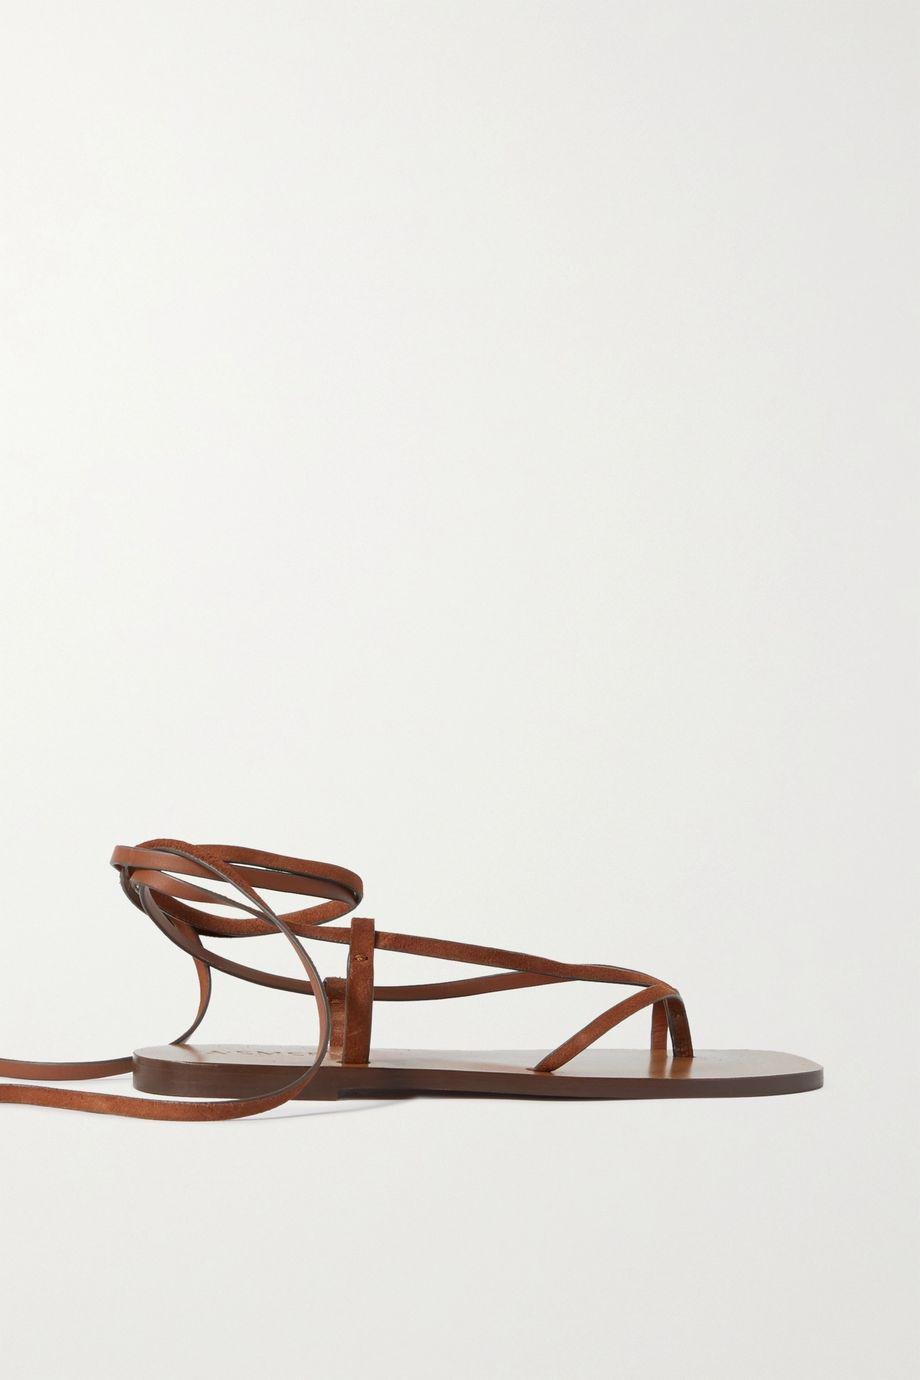 Nolan leather sandals by ANDRE EMERY